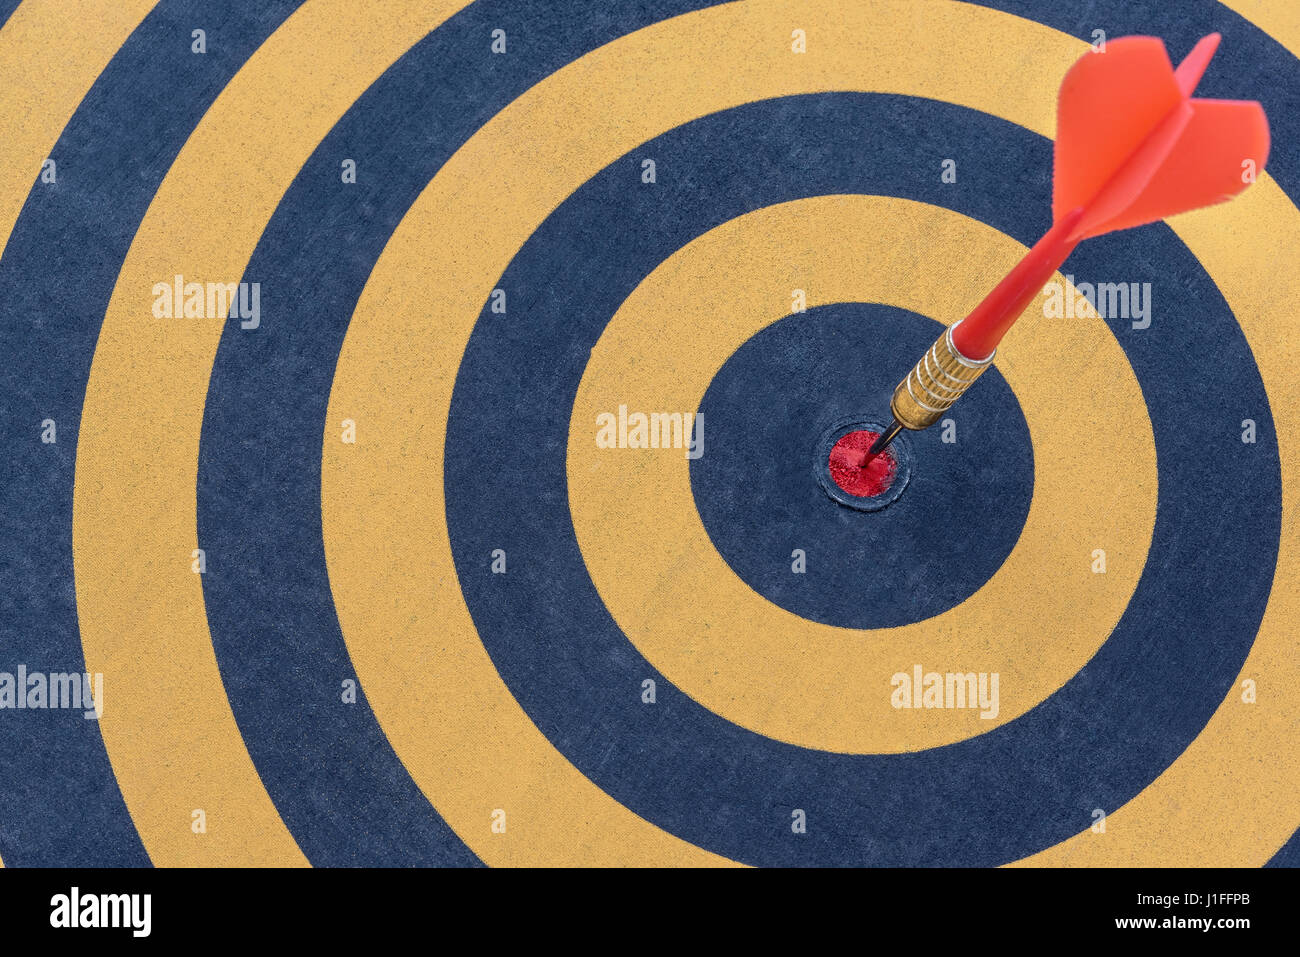 Dart target with arrow on bullseye, Goal target success business investment financial strategy concept, abstract background Stock Photo